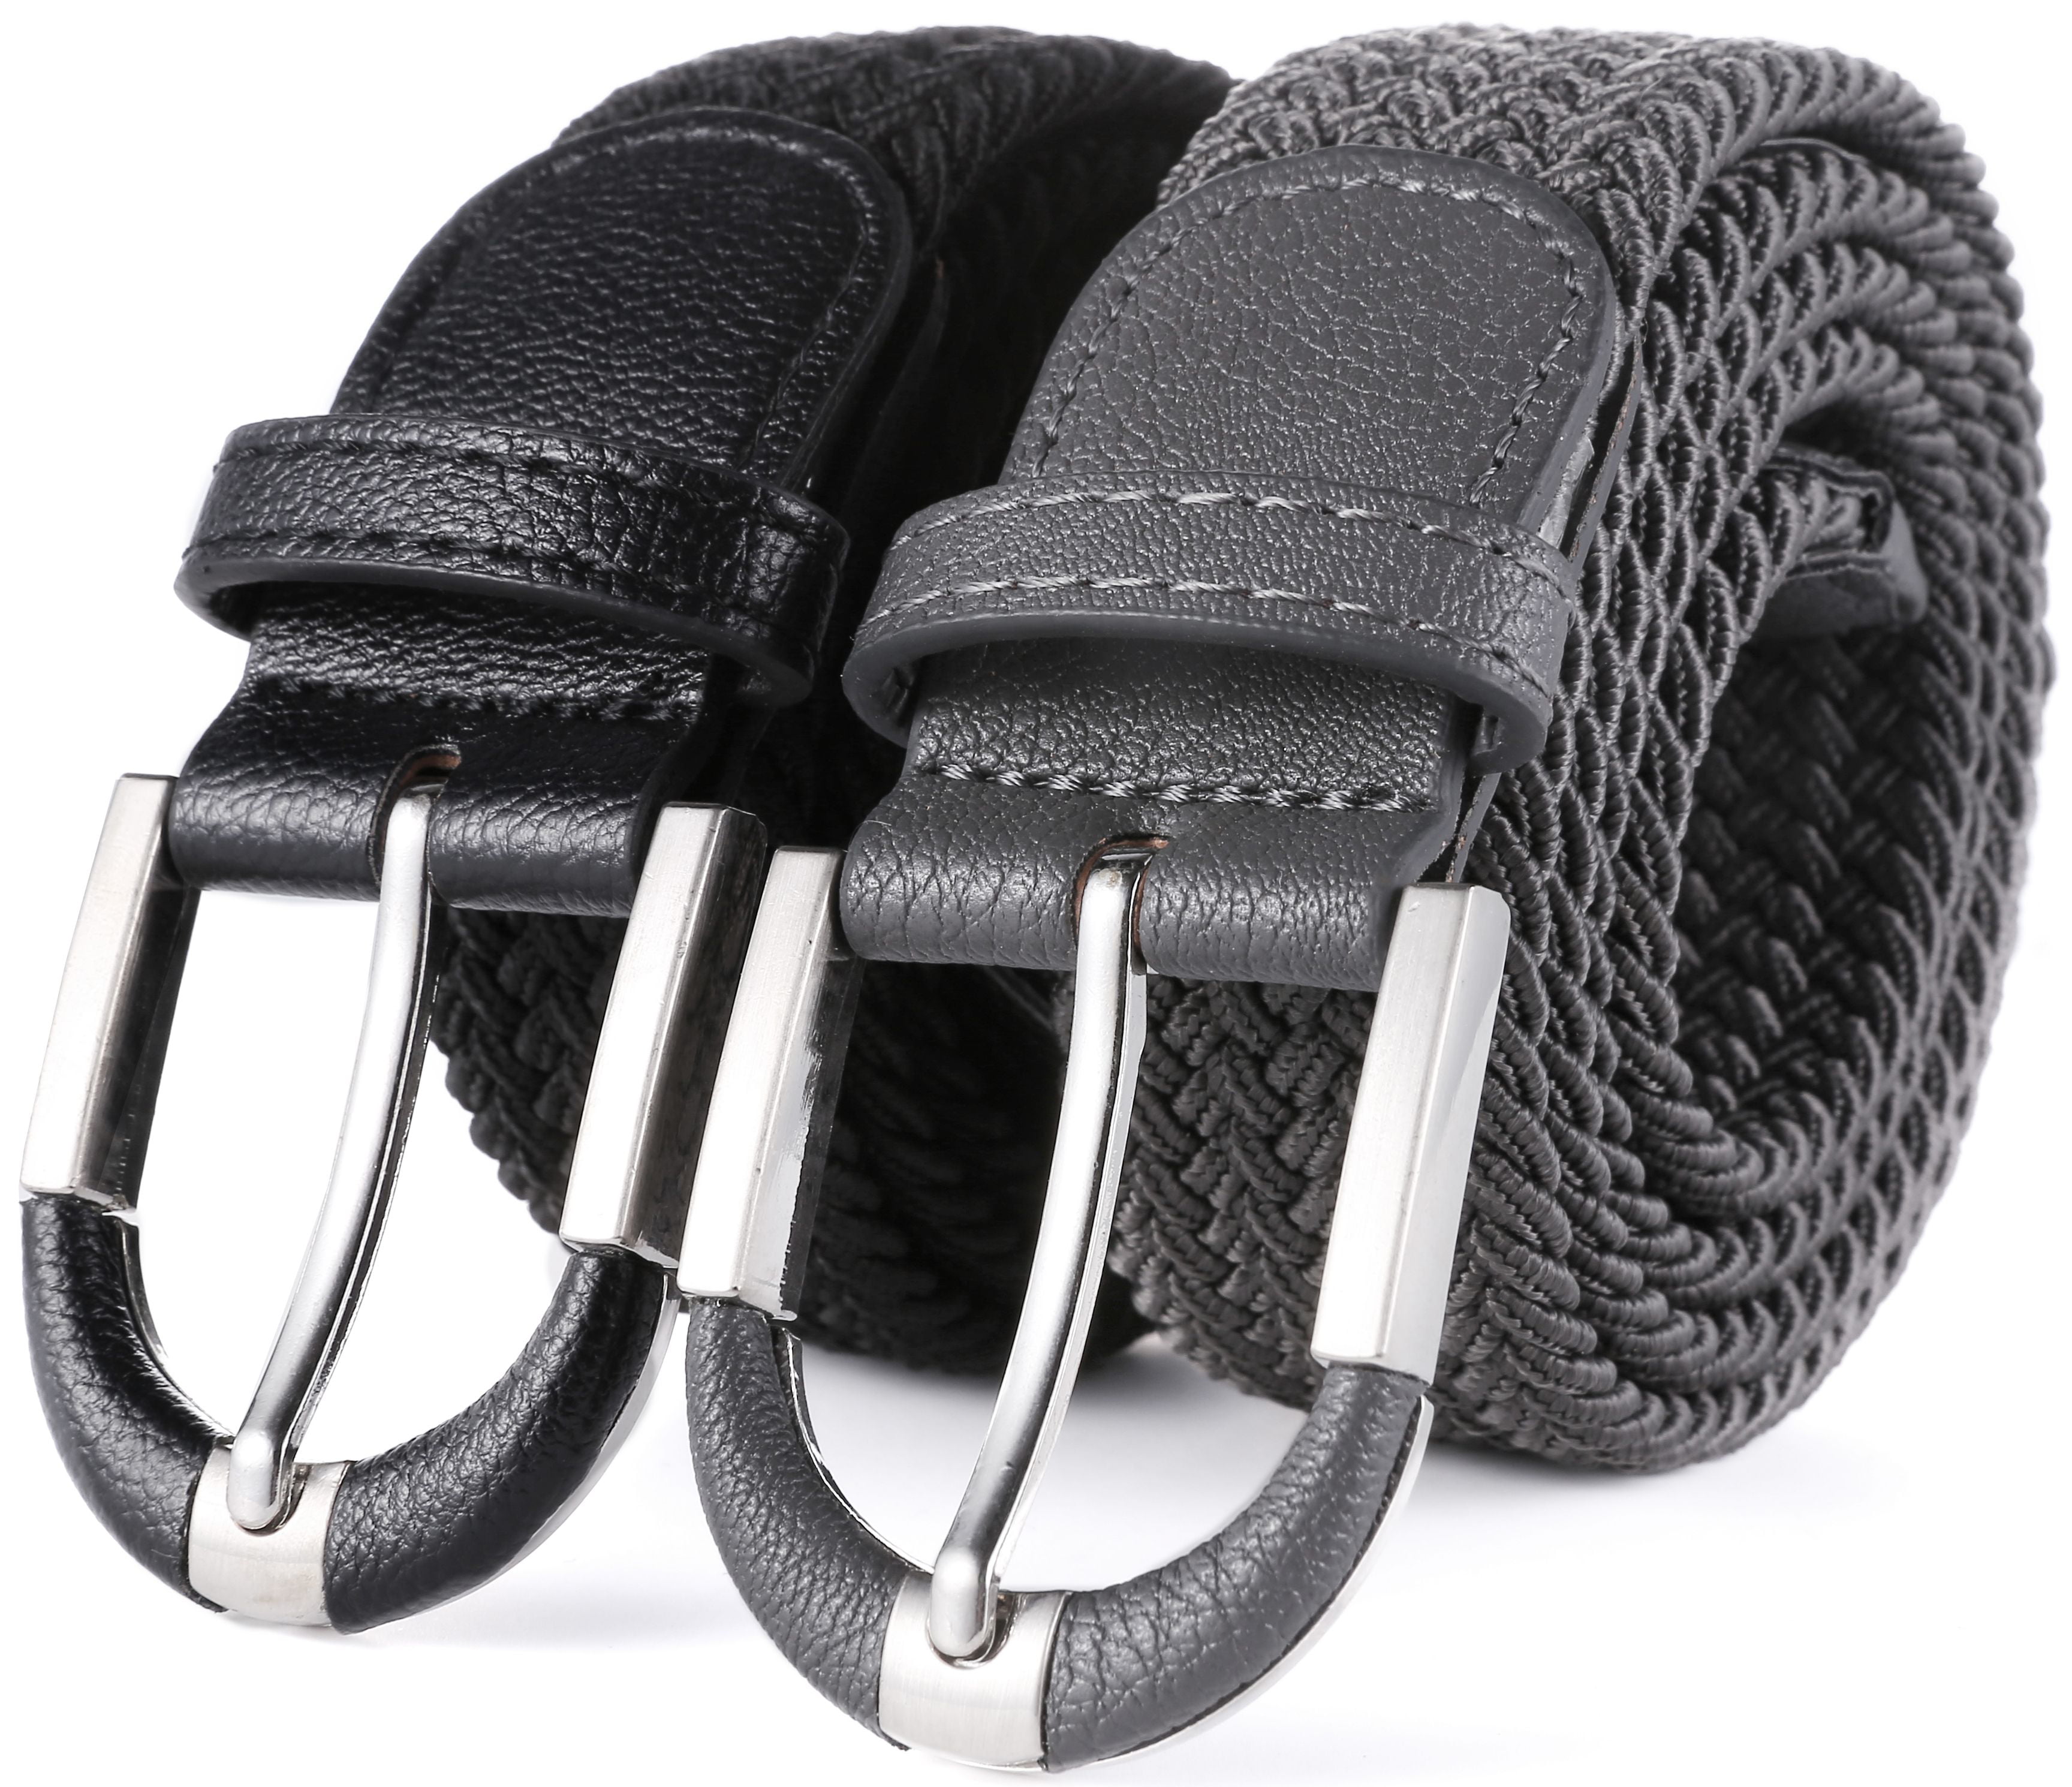 MENS WEBBING BELTS REAL LEATHER TRIM LADIES ELASTICATED WOVEN BRAIDED STRETCH